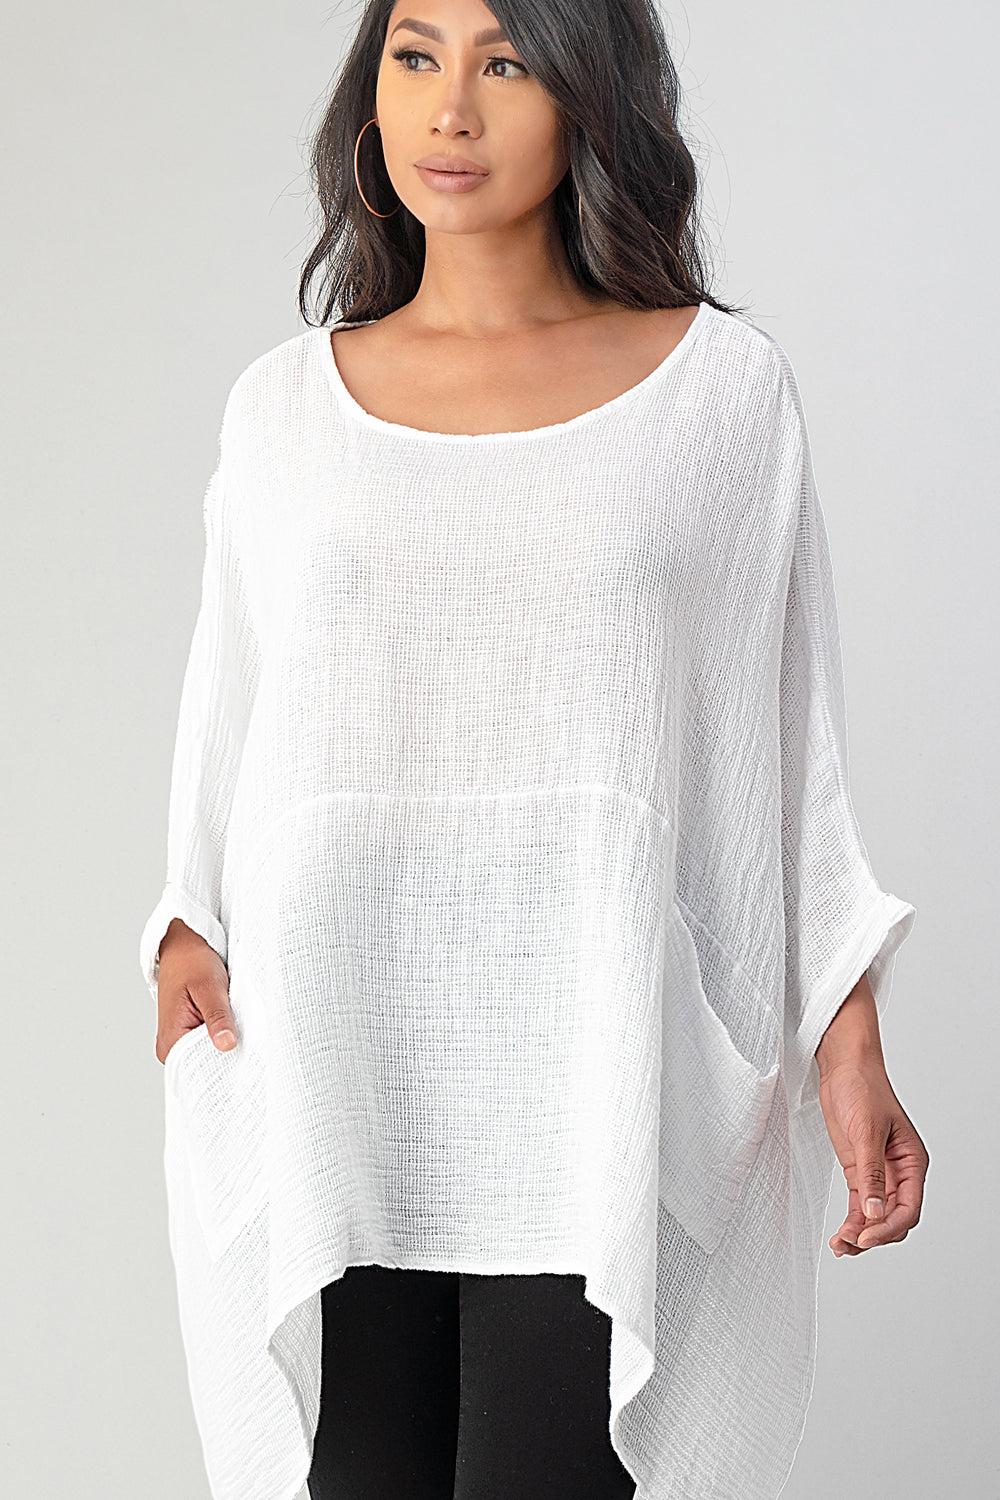 Big Cut Glora Linen Tunic With Front Pockets